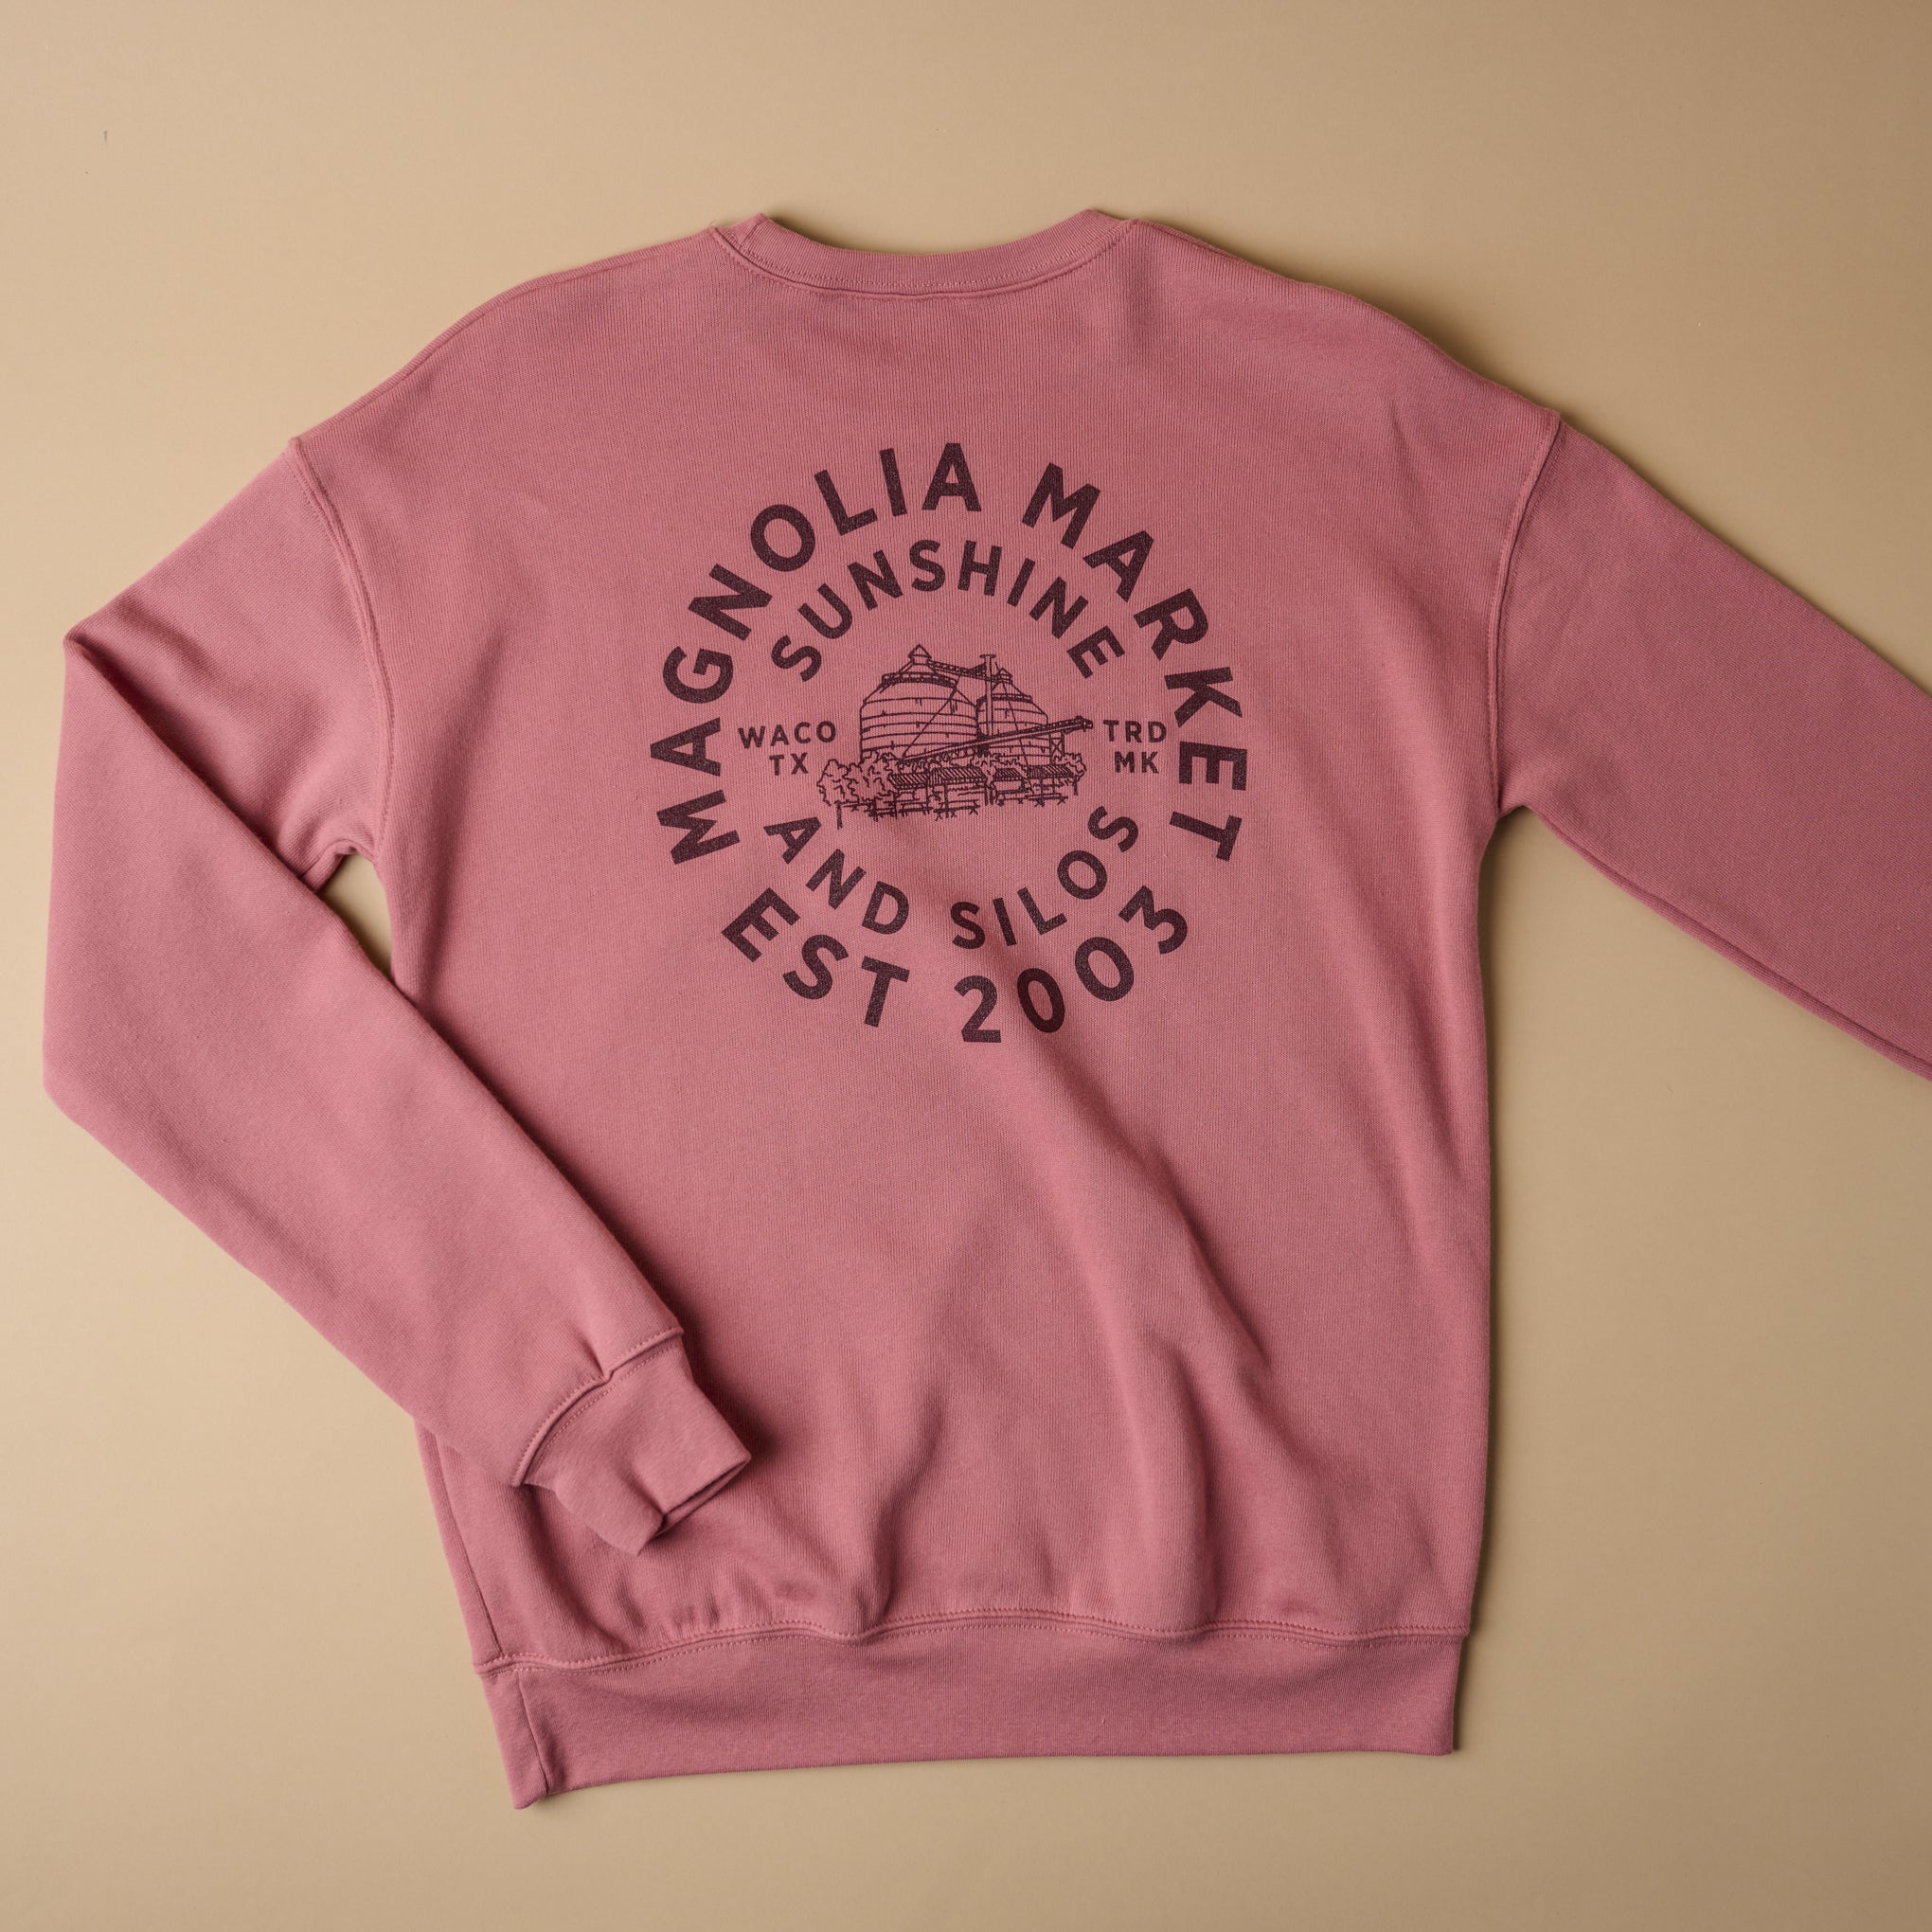 Sunshine Seal Mauve Sweatshirt On sale for $51.20, discounted from $64.00